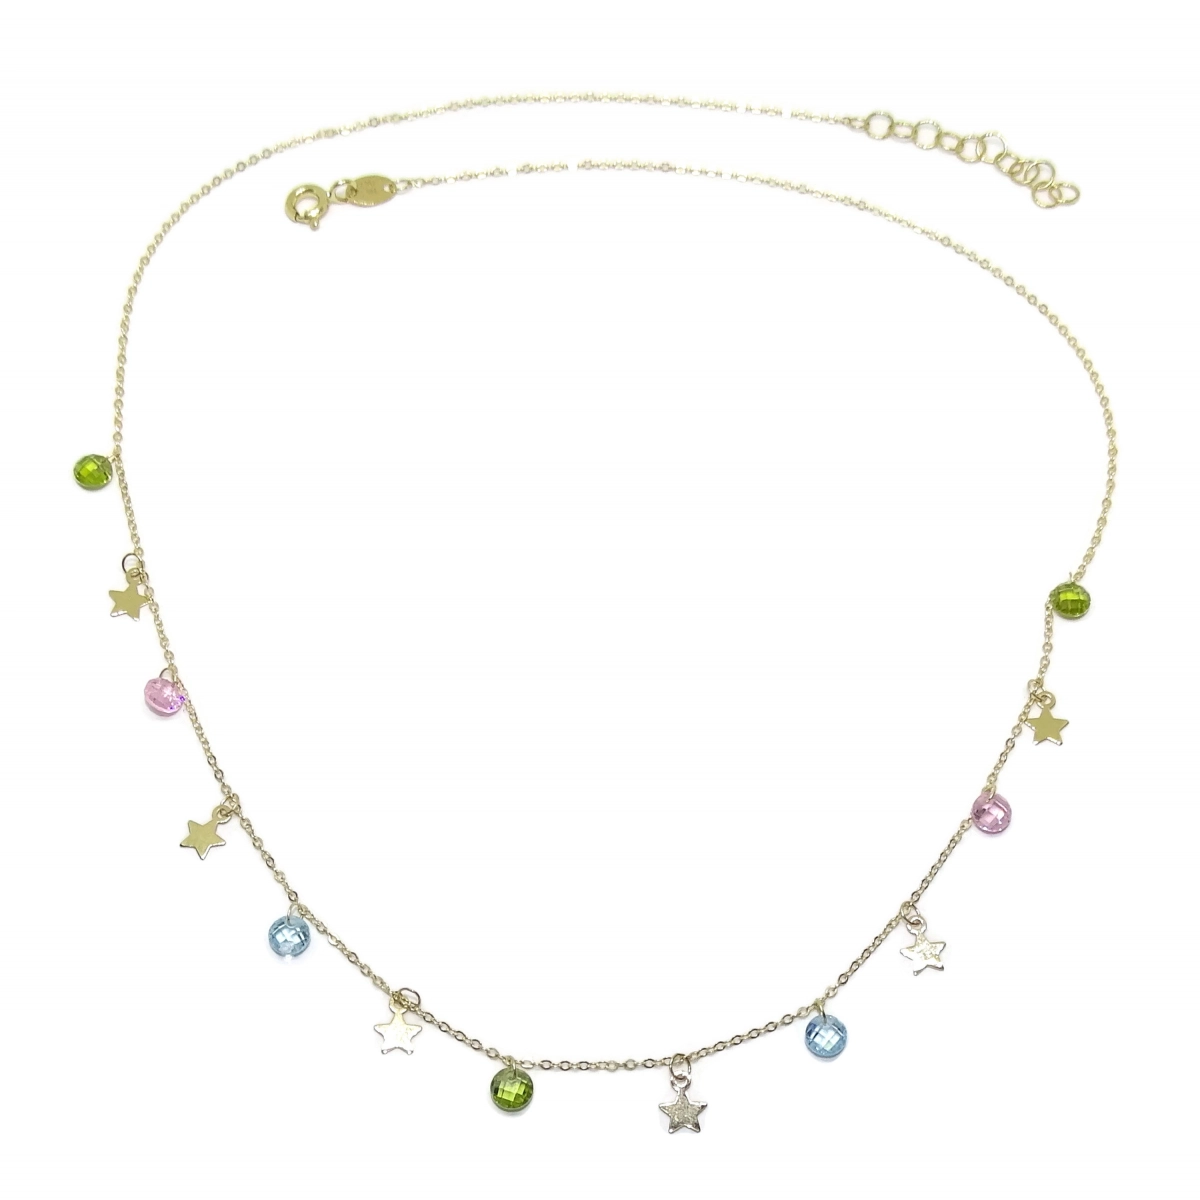 NECKLACE OF 18K YELLOW GOLD WITH 6 GOLD STARS 5MM AND 7 ZIRCONS OF COLOR NEVER SAY NEVER